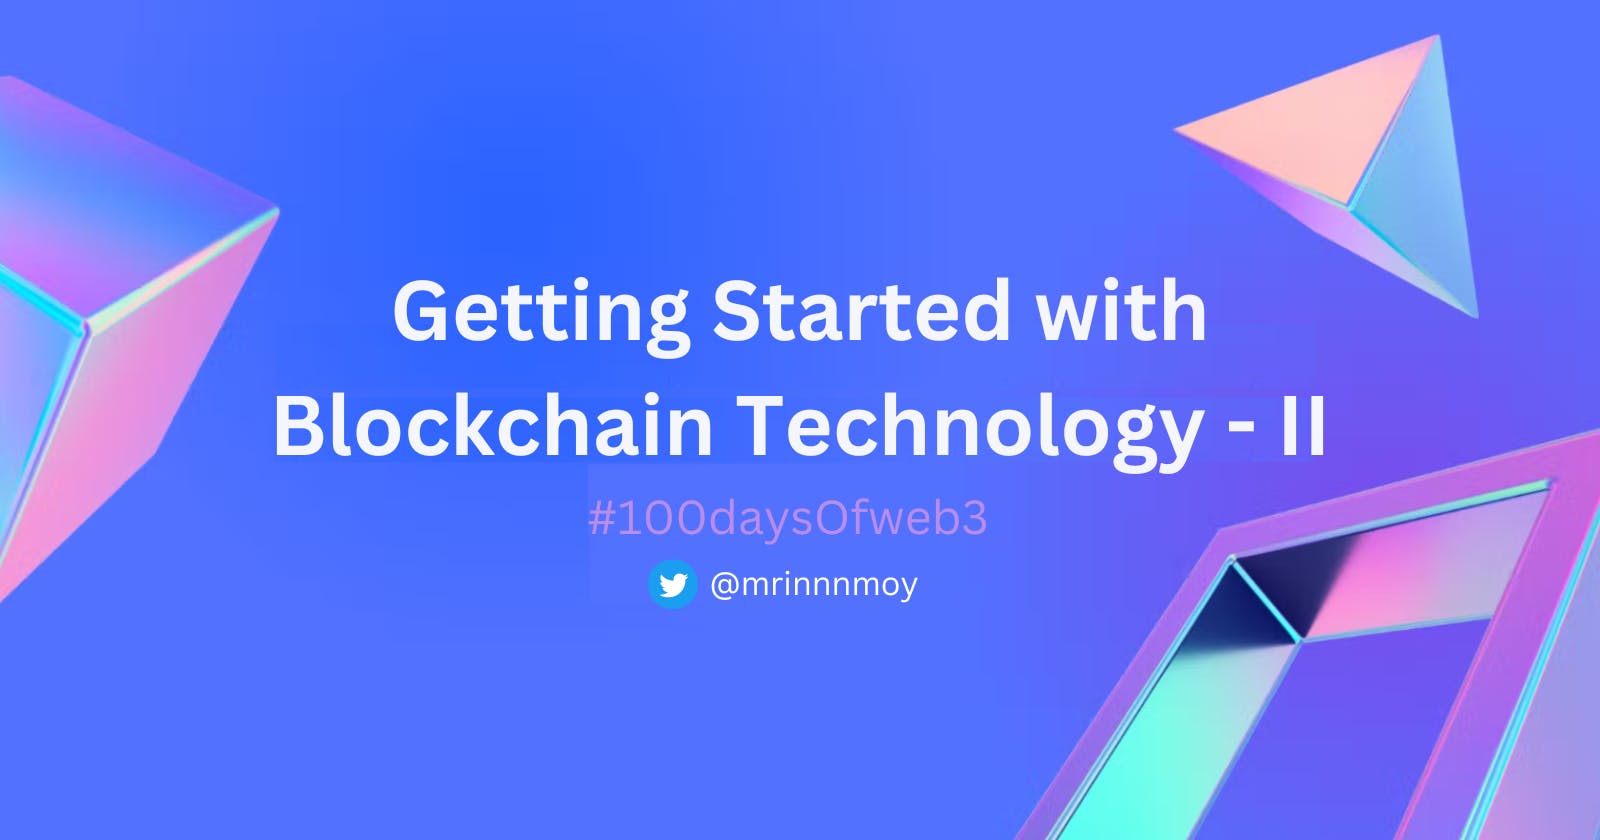 Getting Started with Blockchain Technology - II